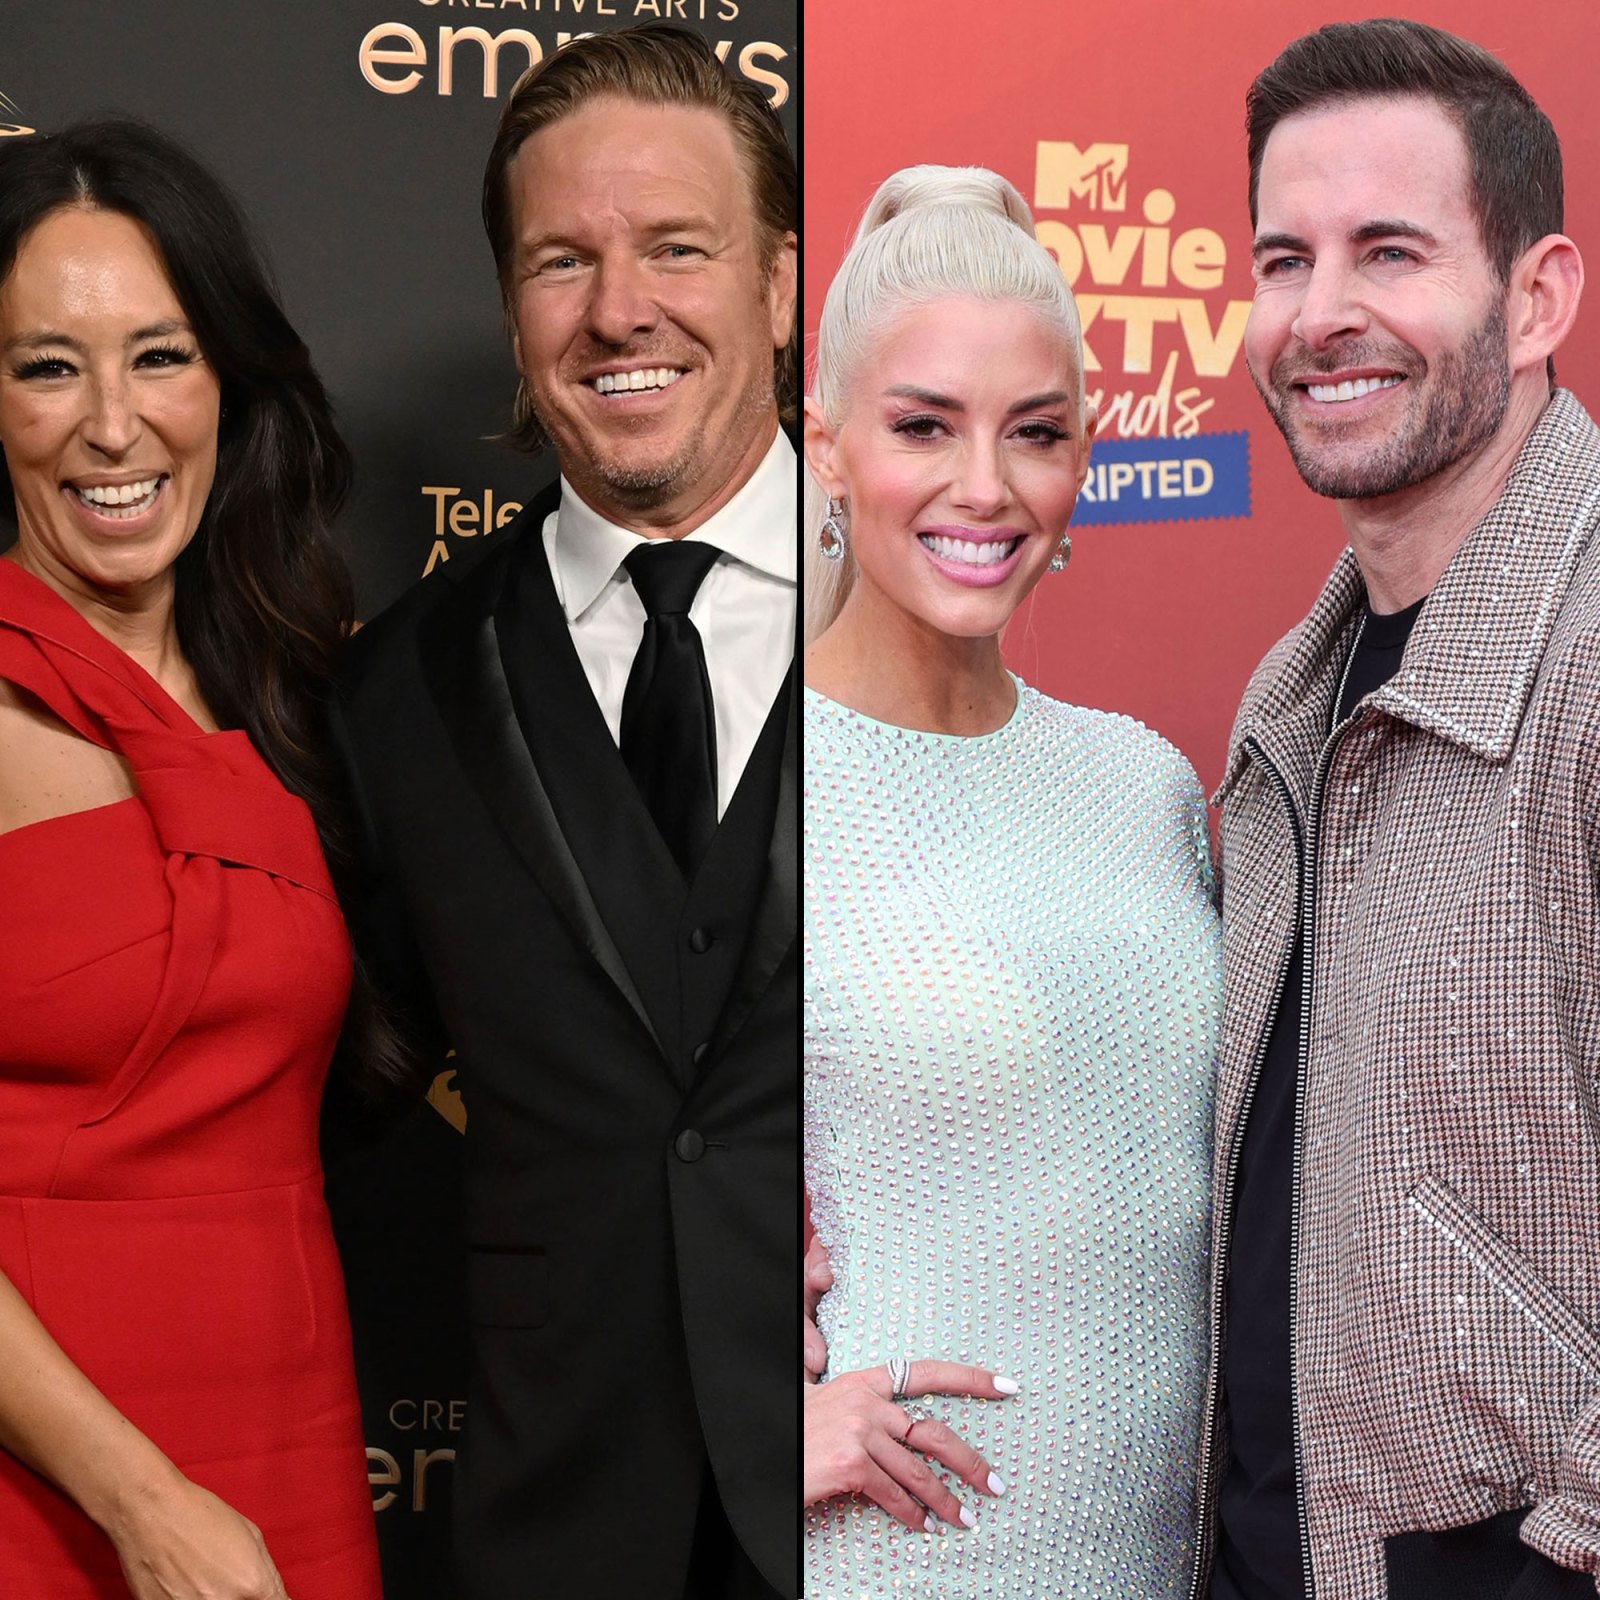 Celebrity Couples With Home Renovation Shows Together: Chip and Joanna Gaines, Tarek El Moussa and Heather Rae Young, More red dress